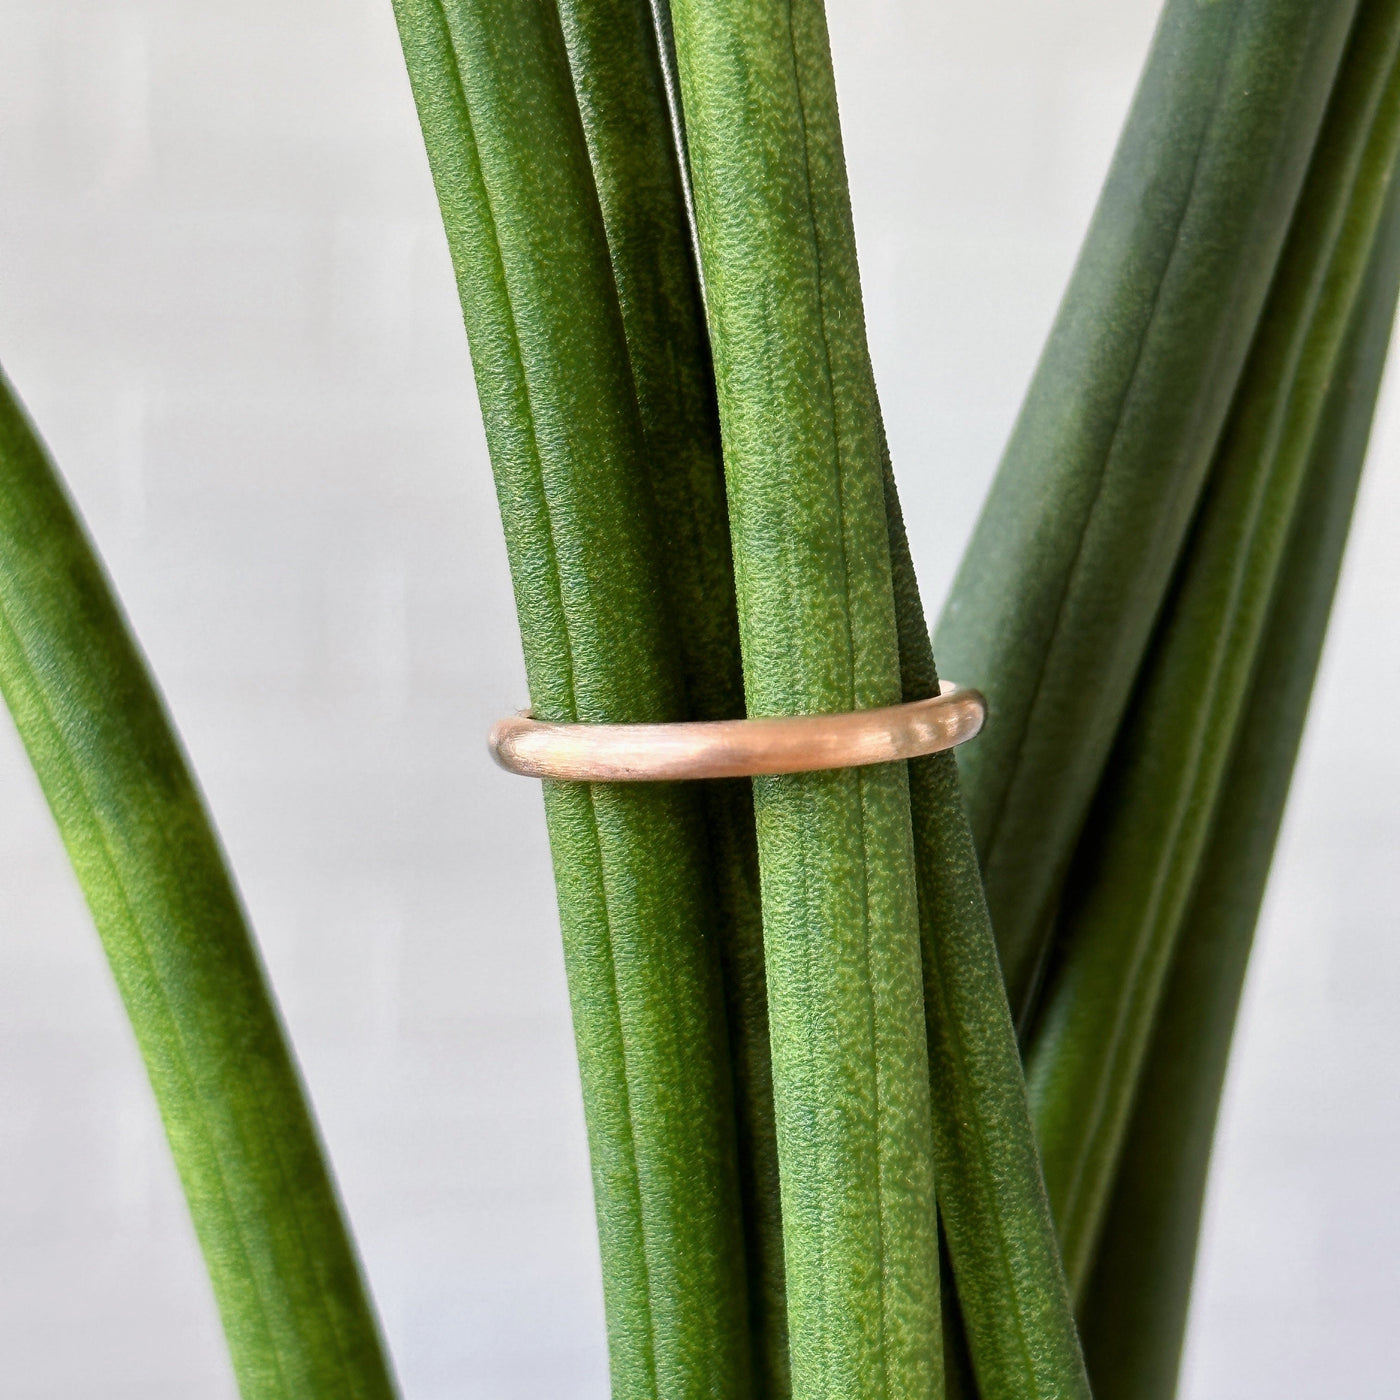 2mm wide 14k rose gold half round band with brushed finish